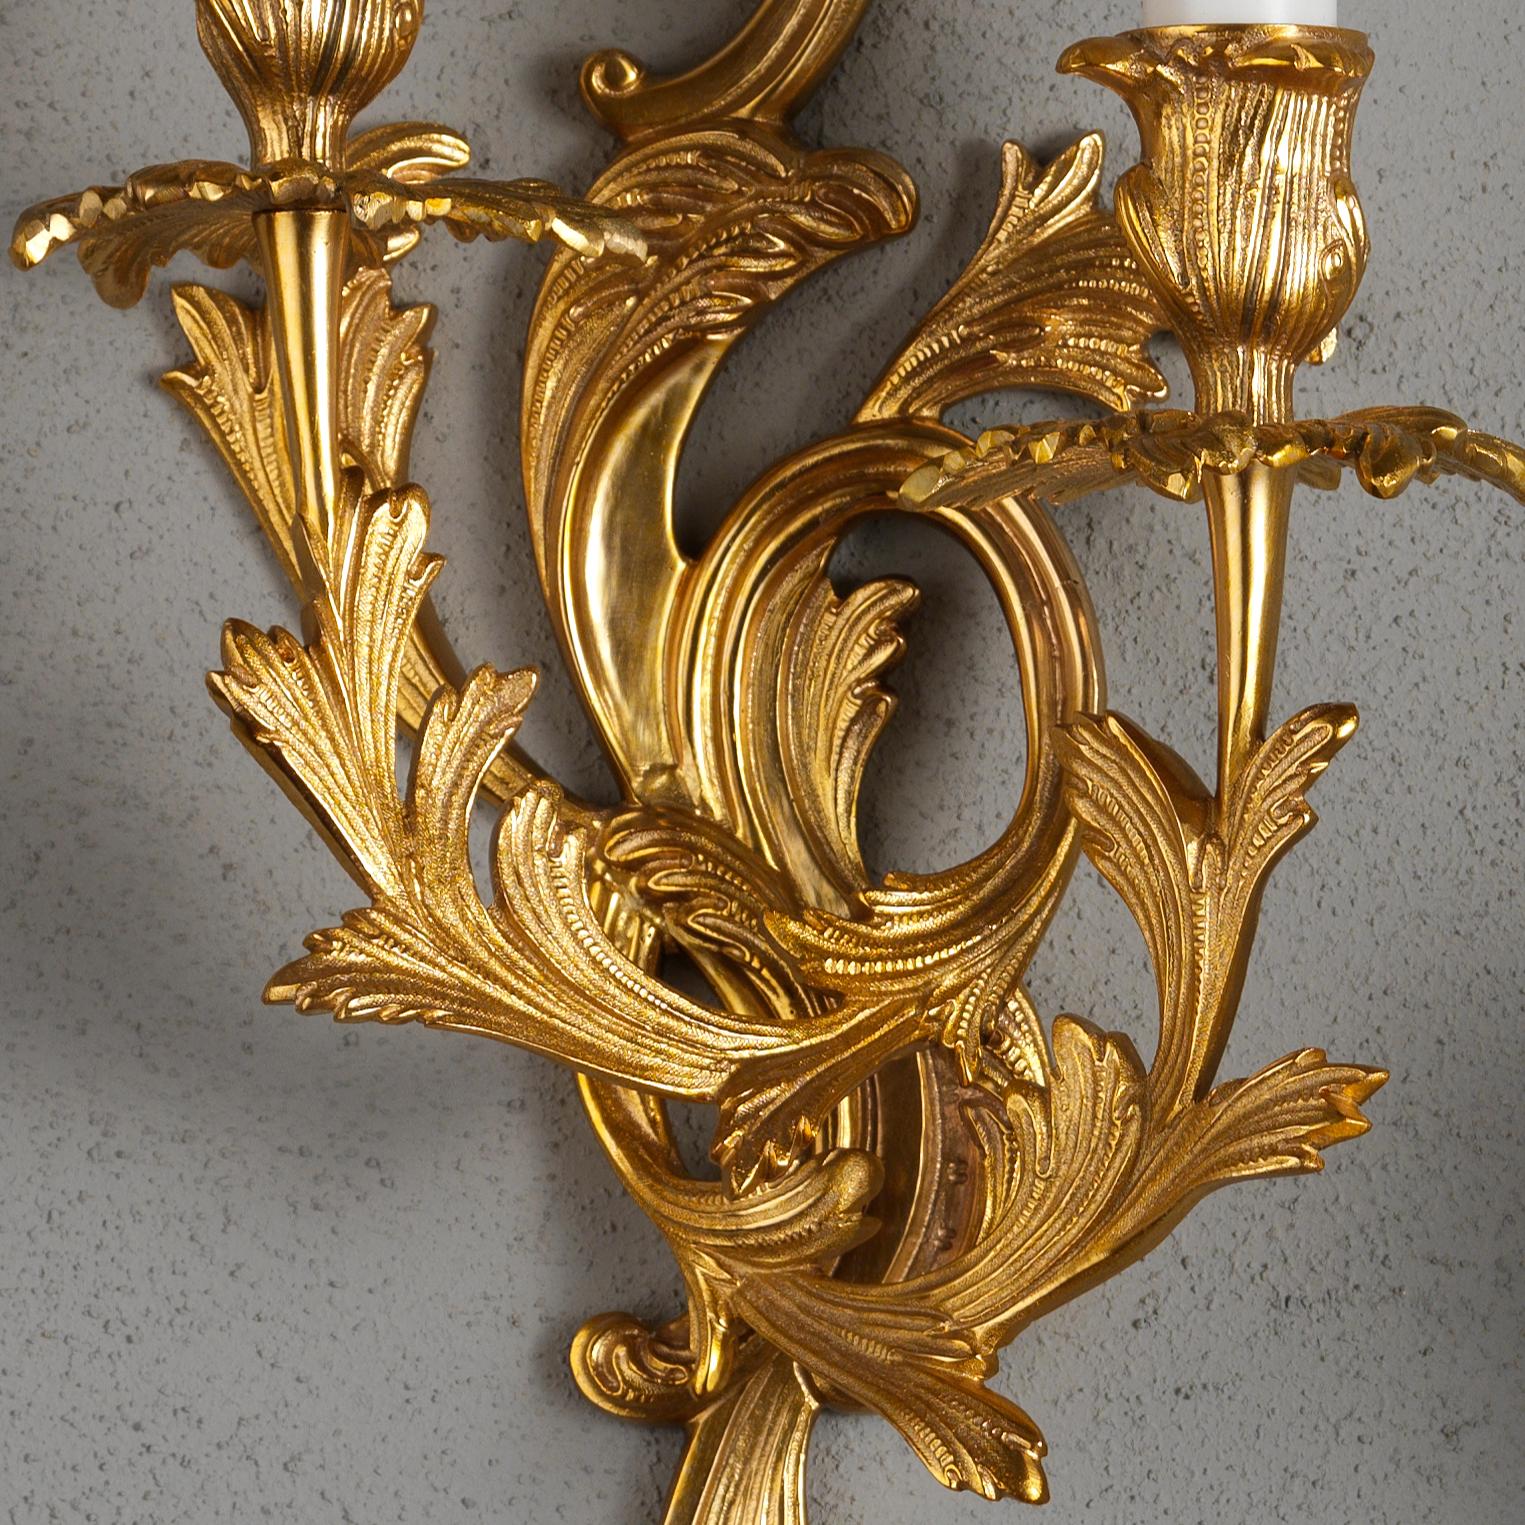 Set of Louis XV Style Gilt Bronze Wall Sconces By Gherardo Degli Albizzi In New Condition For Sale In Florence, Tuscany